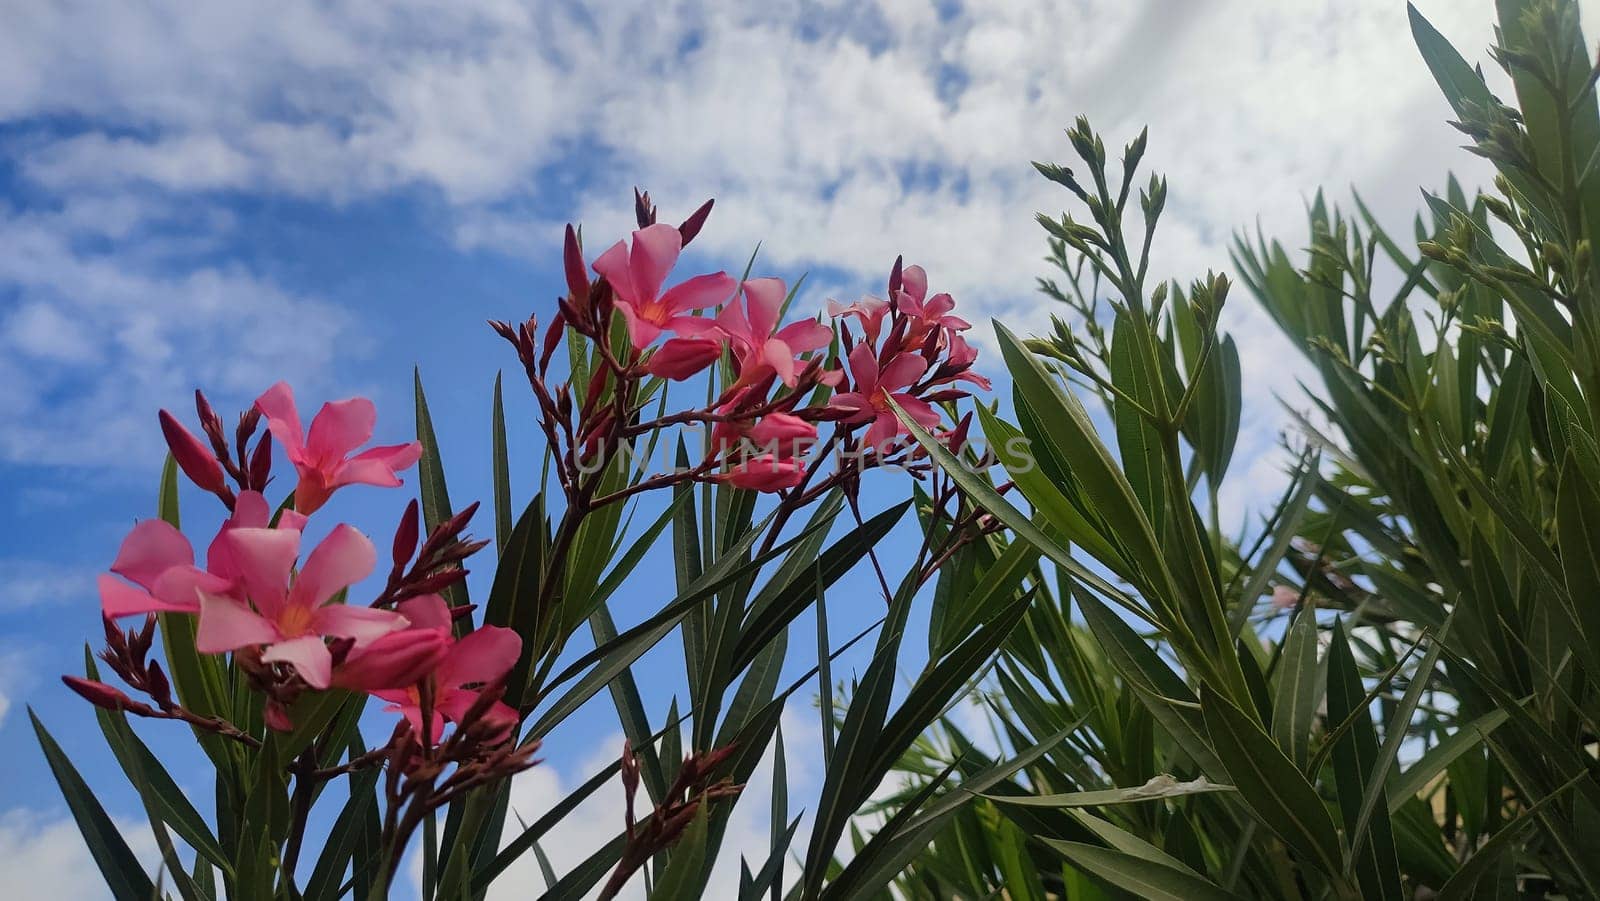 Pink flowers, green leaves, bush flora, blue sky and white clouds nature summer spring. High quality photo